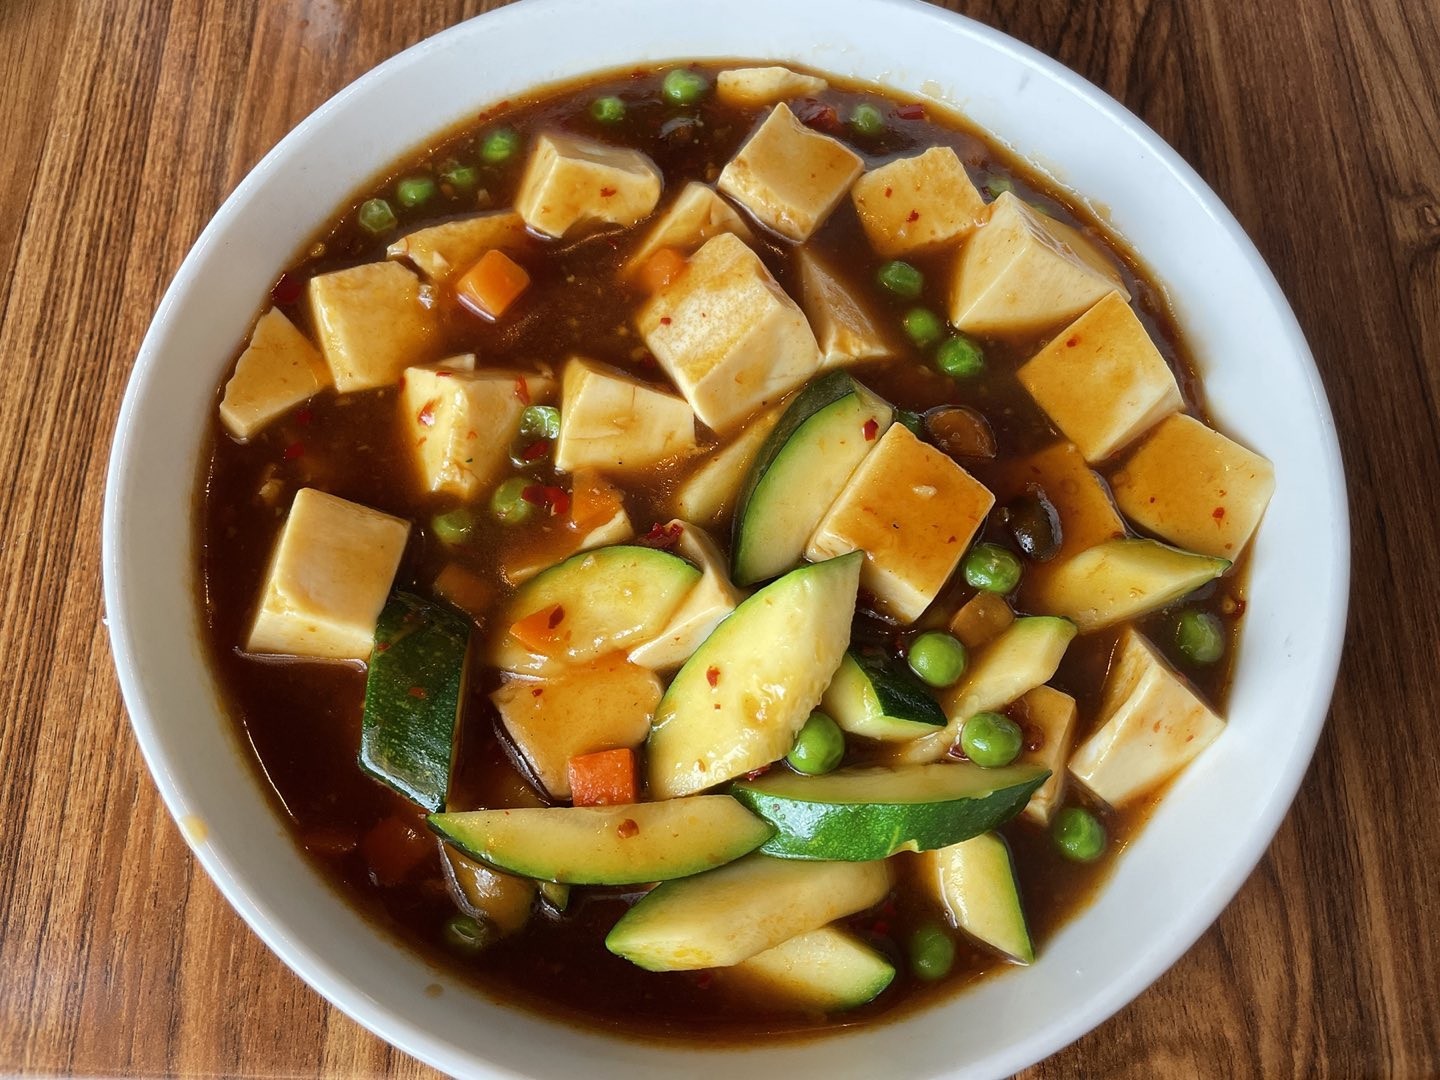 Joy Luck's kung pao tofu is a simple mix of tofu and veggies in a fiery brown-bean sauce.